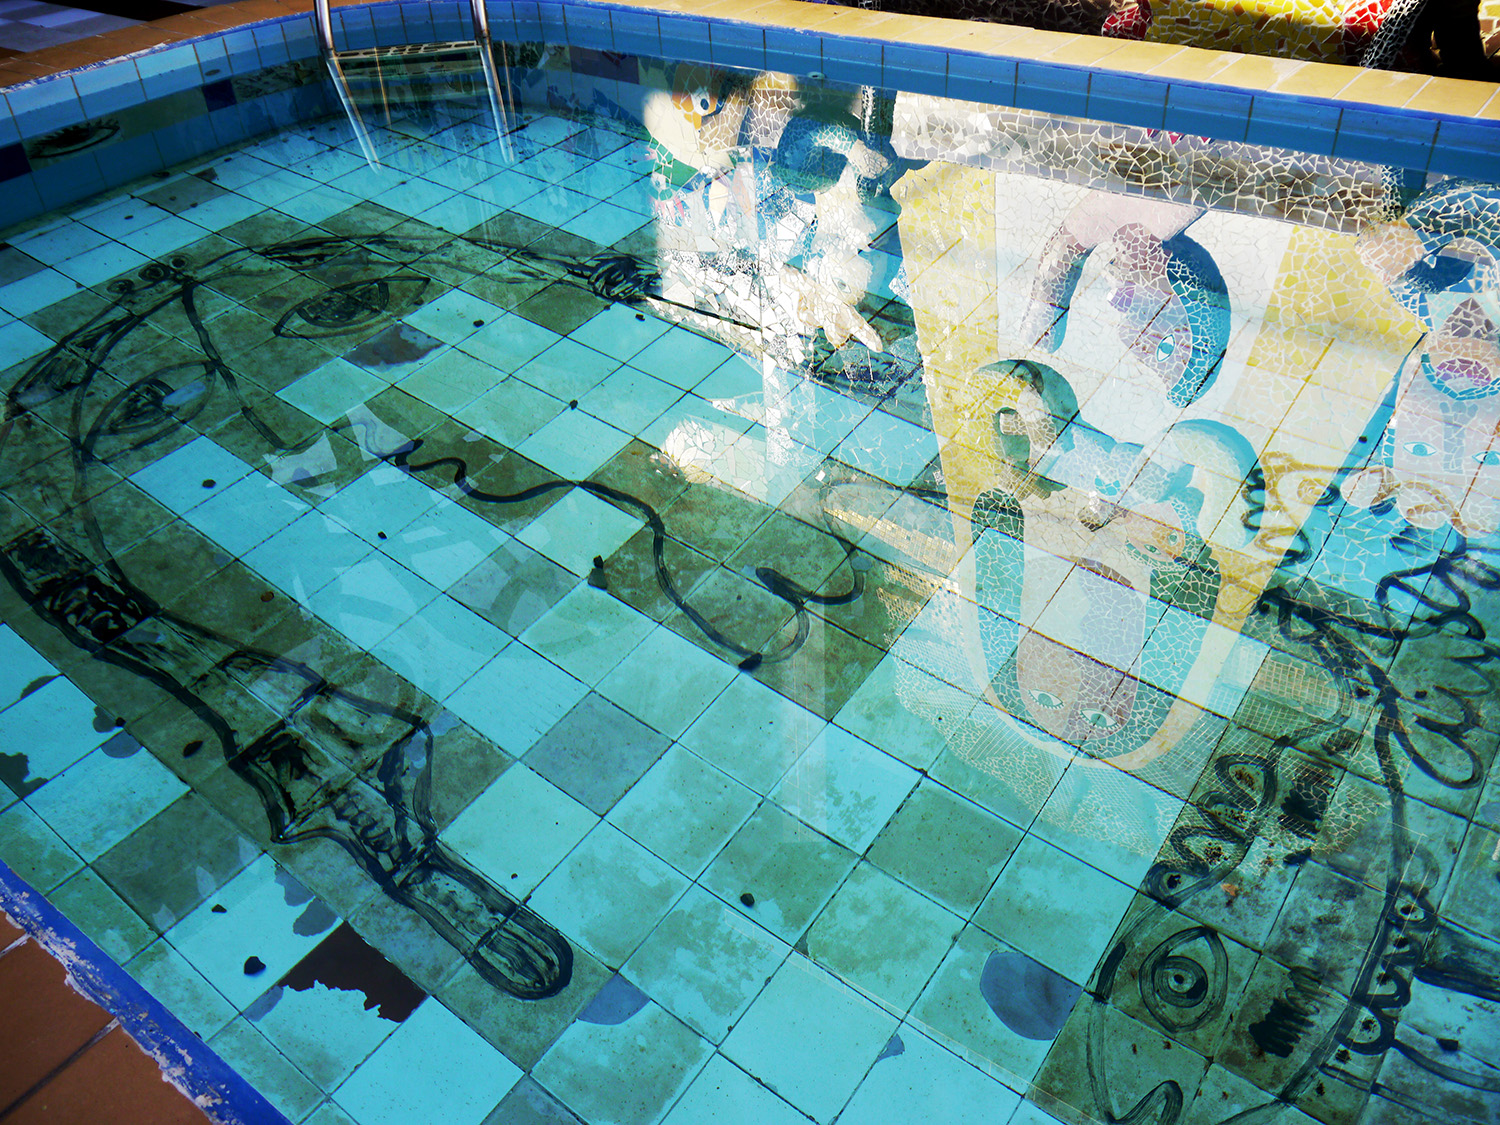 The bottom of a swimming pool features a woman's face in the style of Picasso.